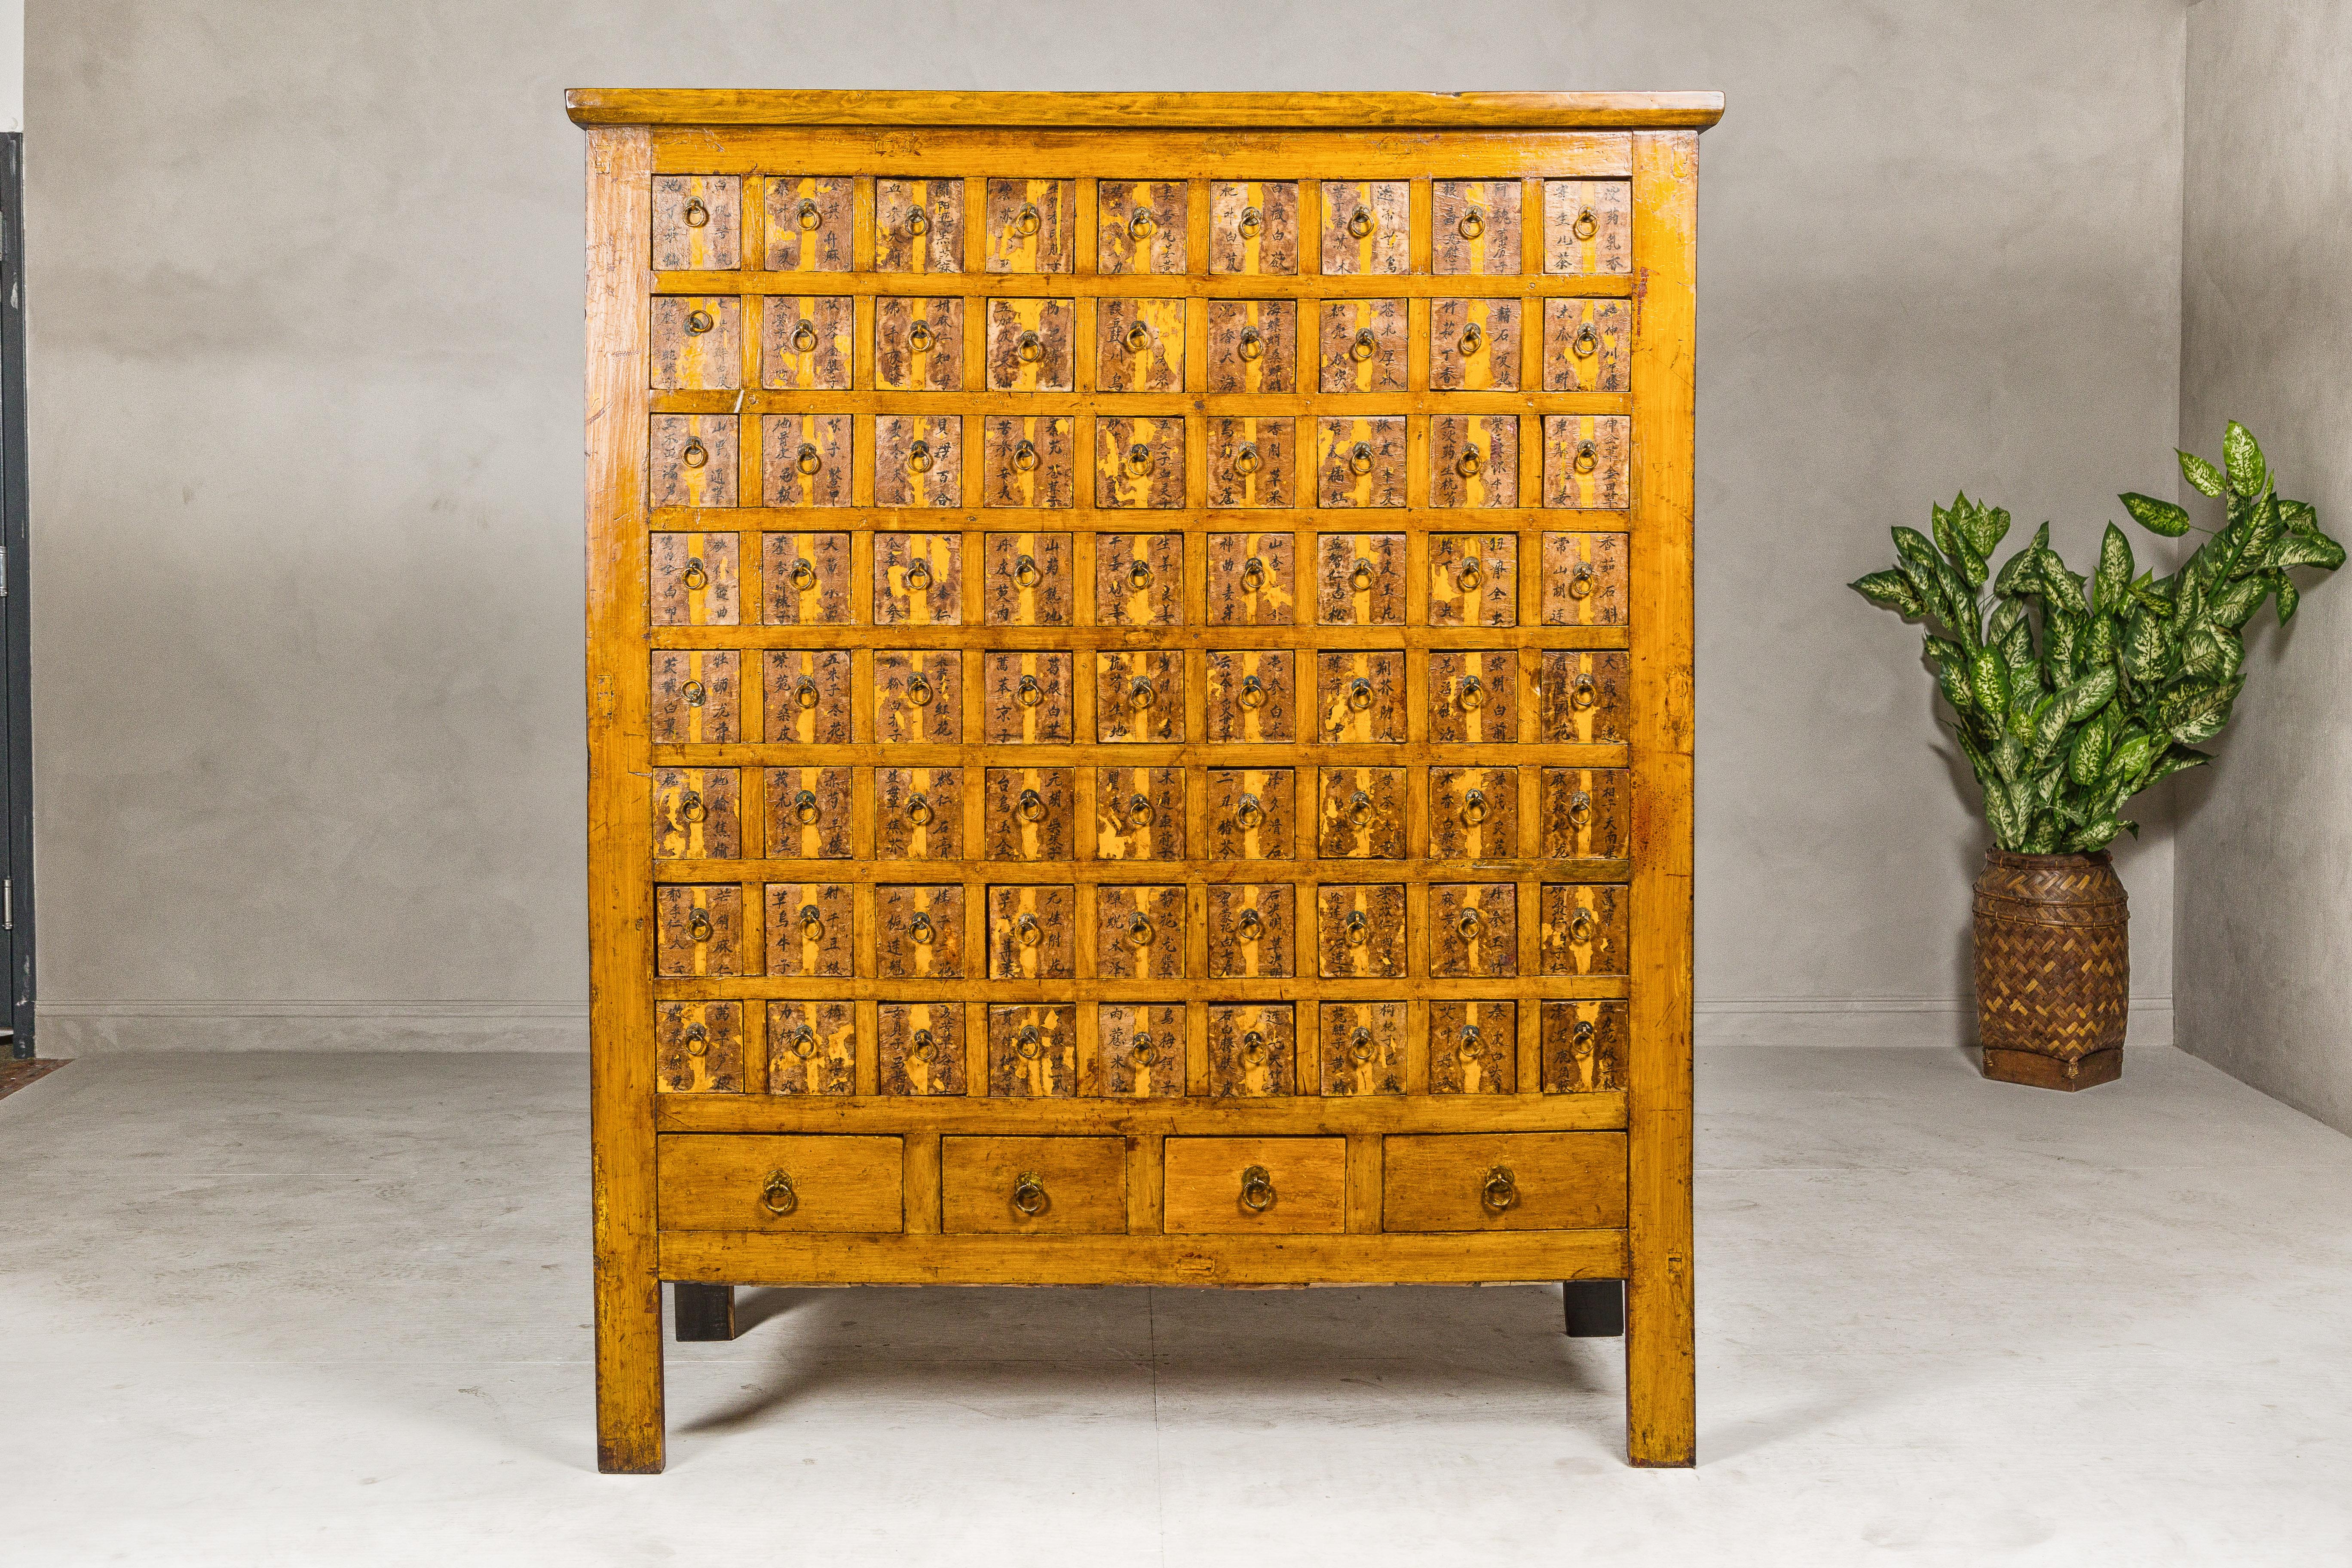 An oversized Qing Dynasty period apothecary cabinet from the 19th century with 72 small drawers, four medium sized ones, hand-painted calligraphy and weathered lacquered finish. This monumental Qing Dynasty apothecary cabinet, hailing from the 19th